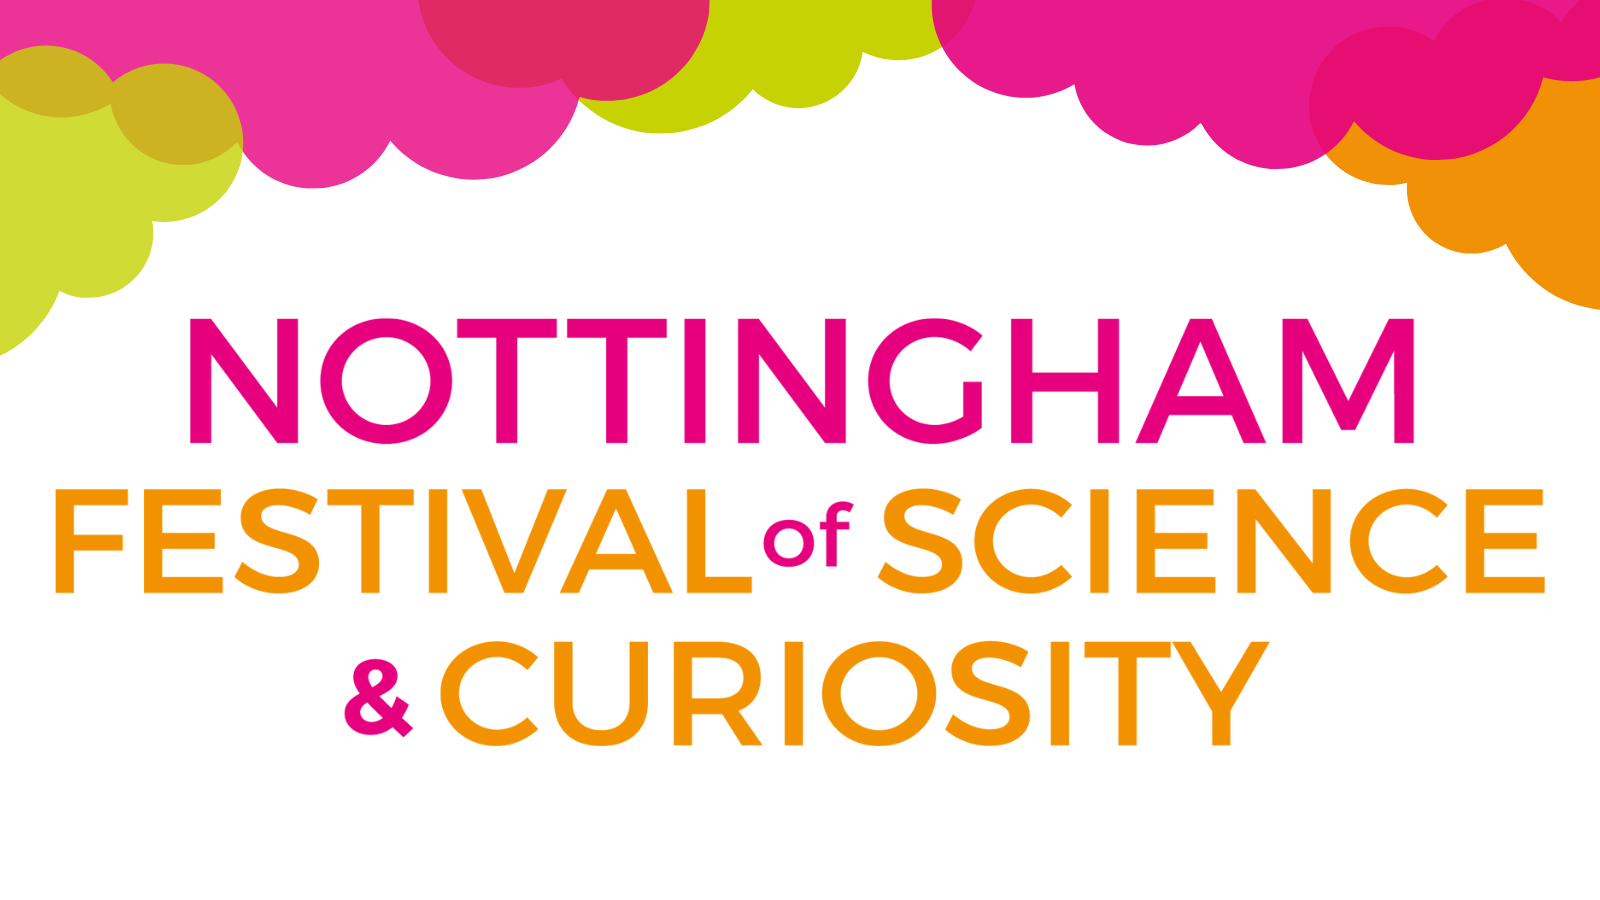 Free events celebrate science and curiosity